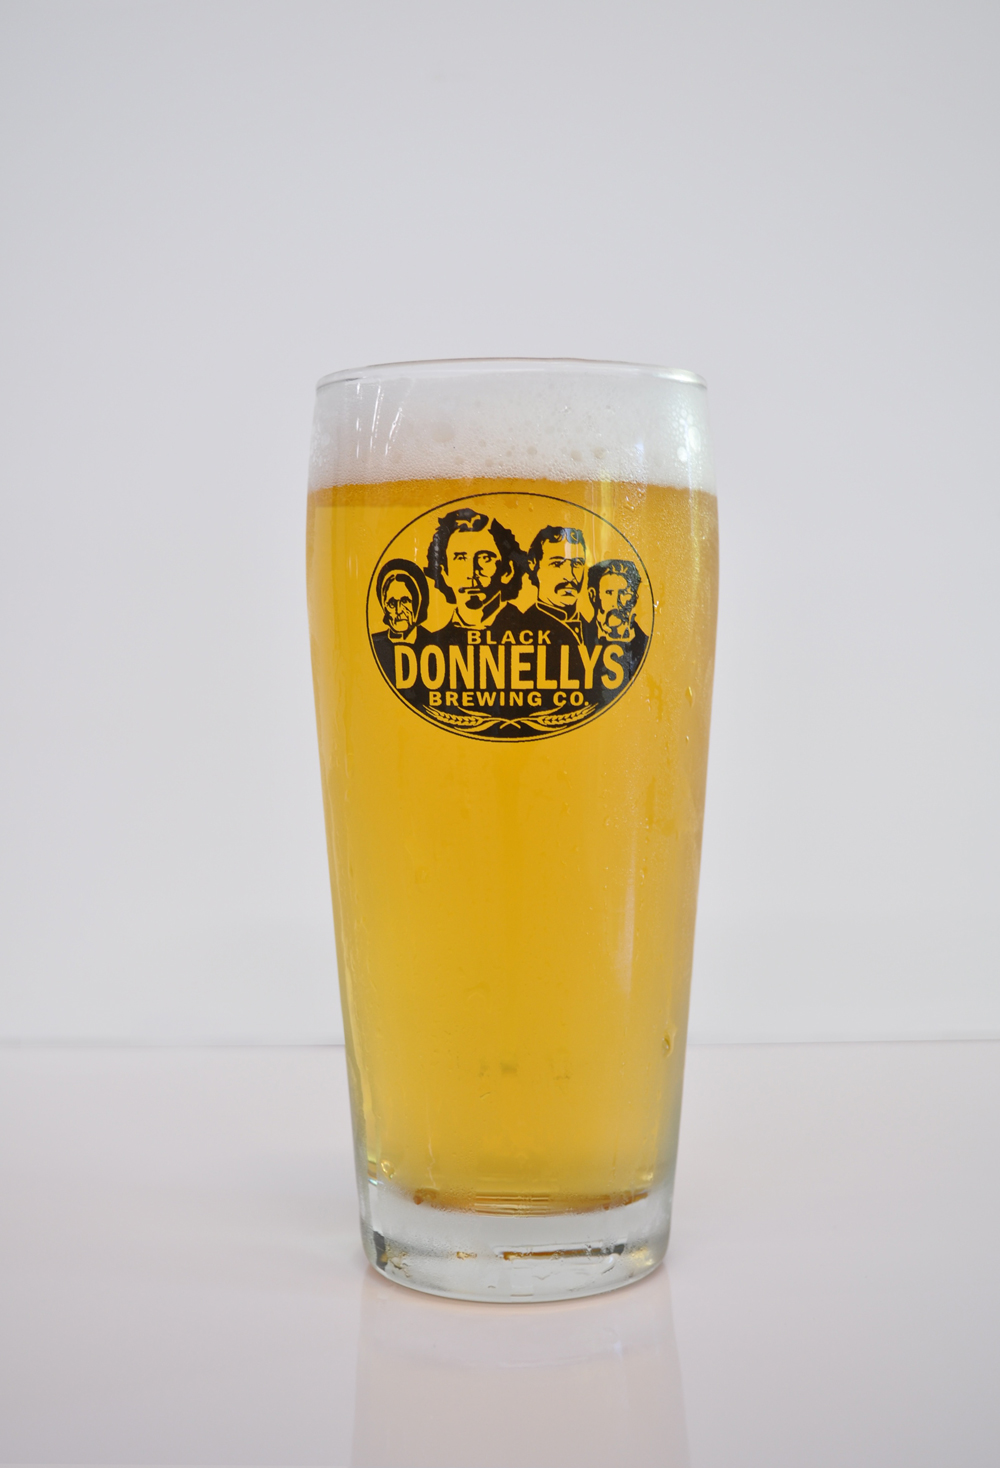 A refreshing pint of Black Donnellys Brewing Company Roman Line Lager beer.